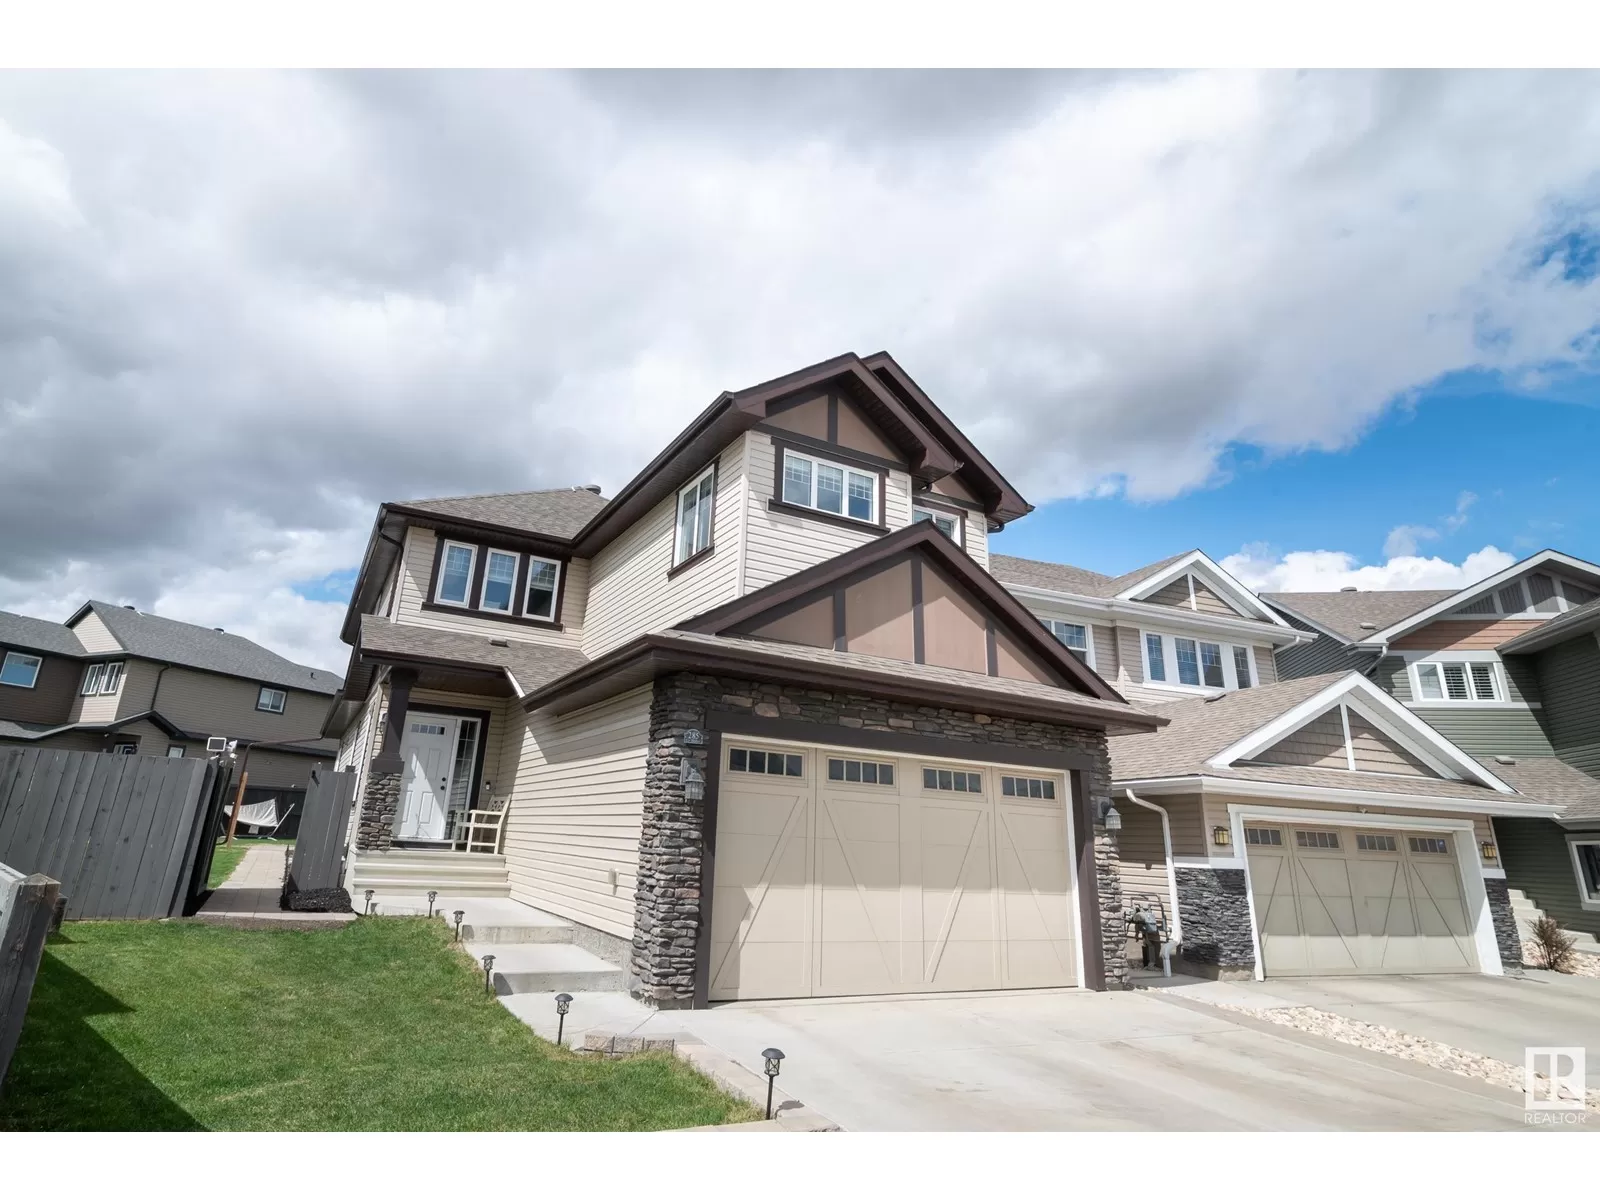 House for rent: 285 Cy Becker Bv Nw, Edmonton, Alberta T5Y 3R6